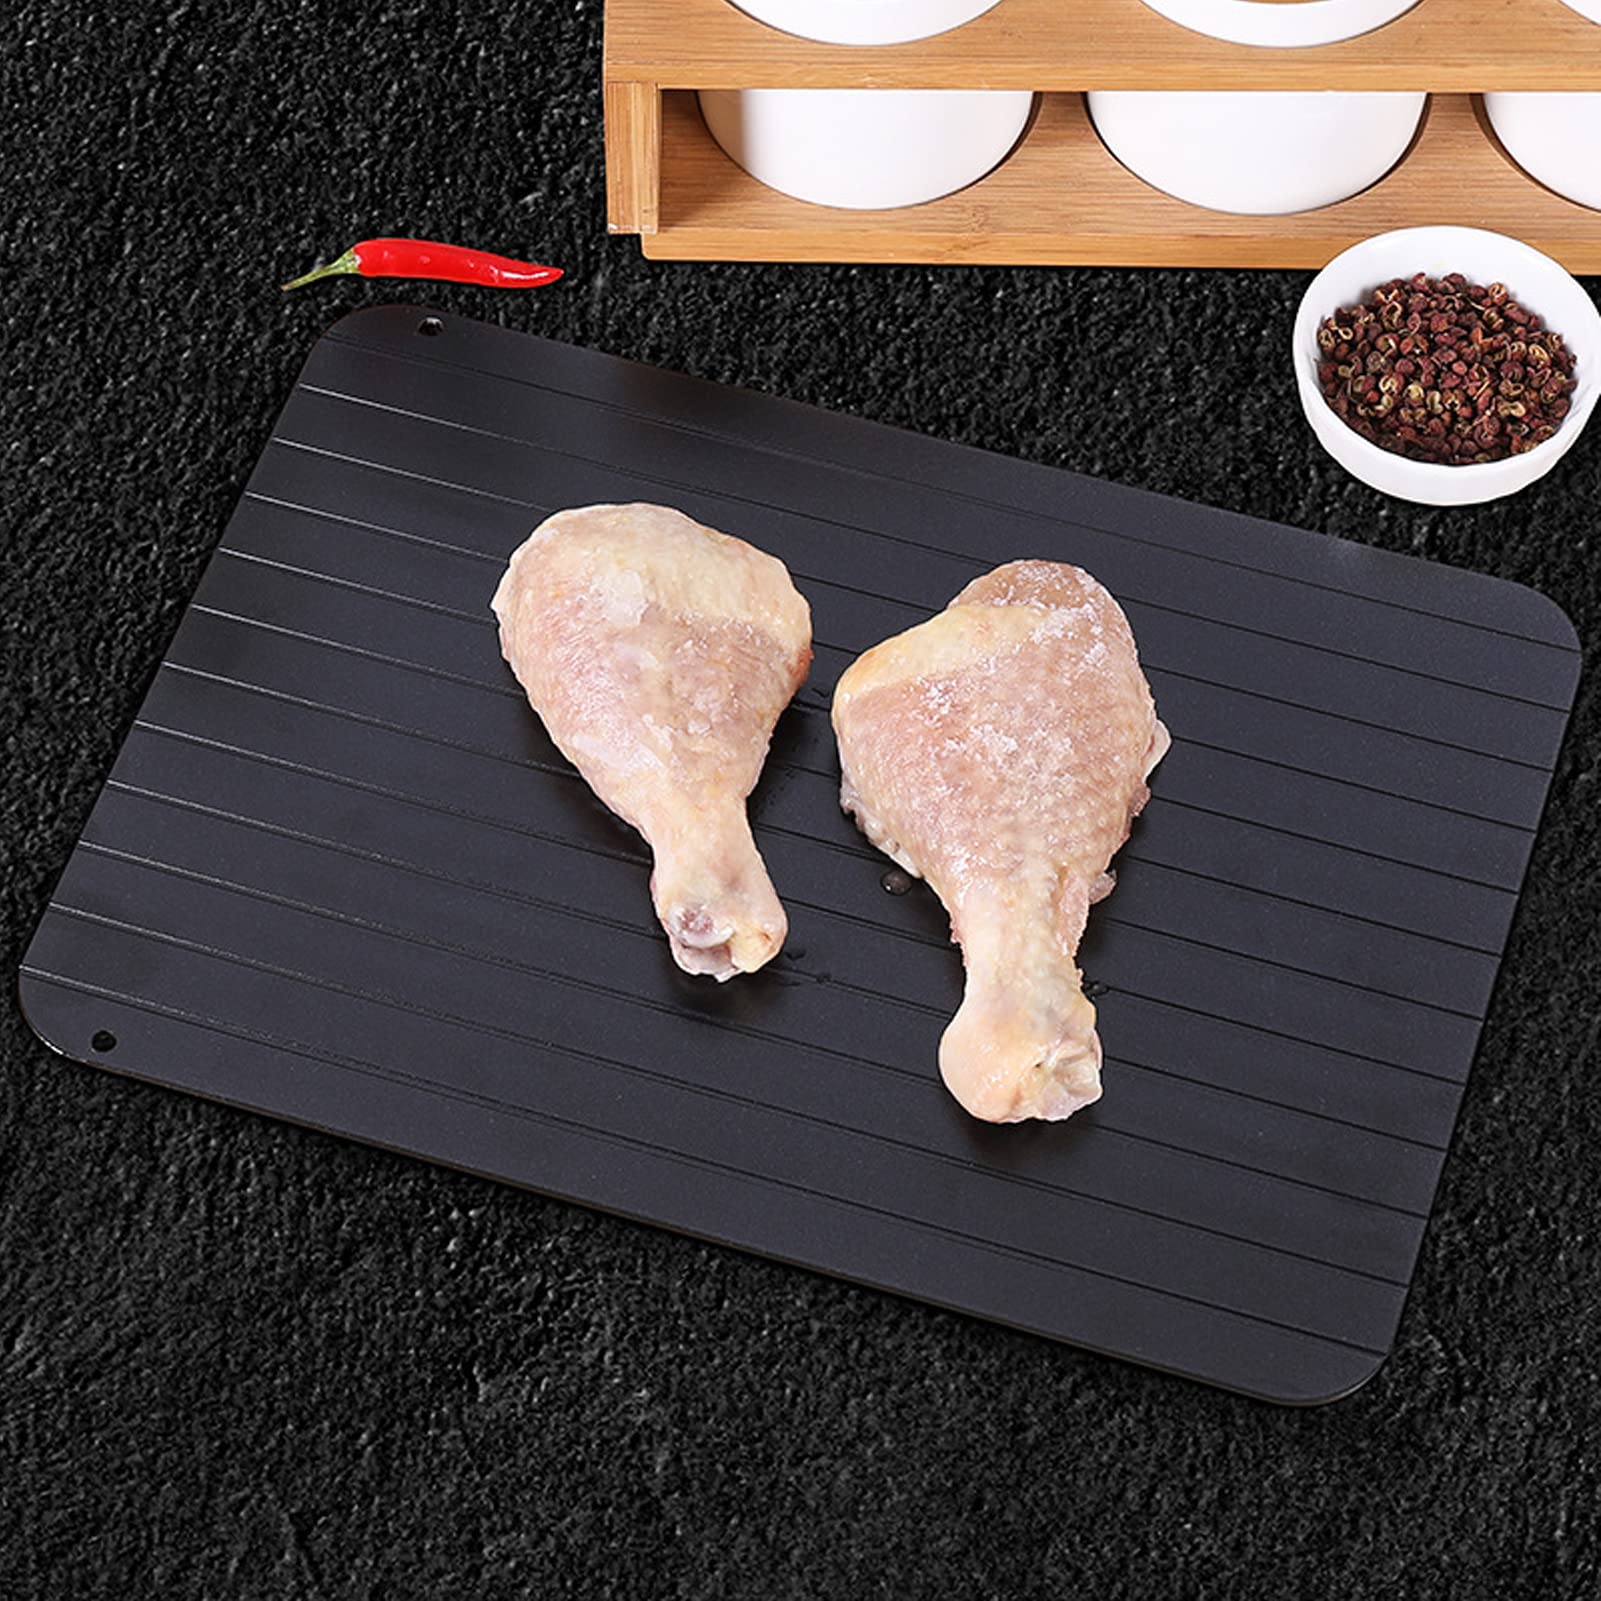 Fast Defrosting Tray Serving Trays Home Restaurant Food Defroster Plate Kitchen Aluminum Alloy Mellow Thawing Plate for Meat and Food(L)